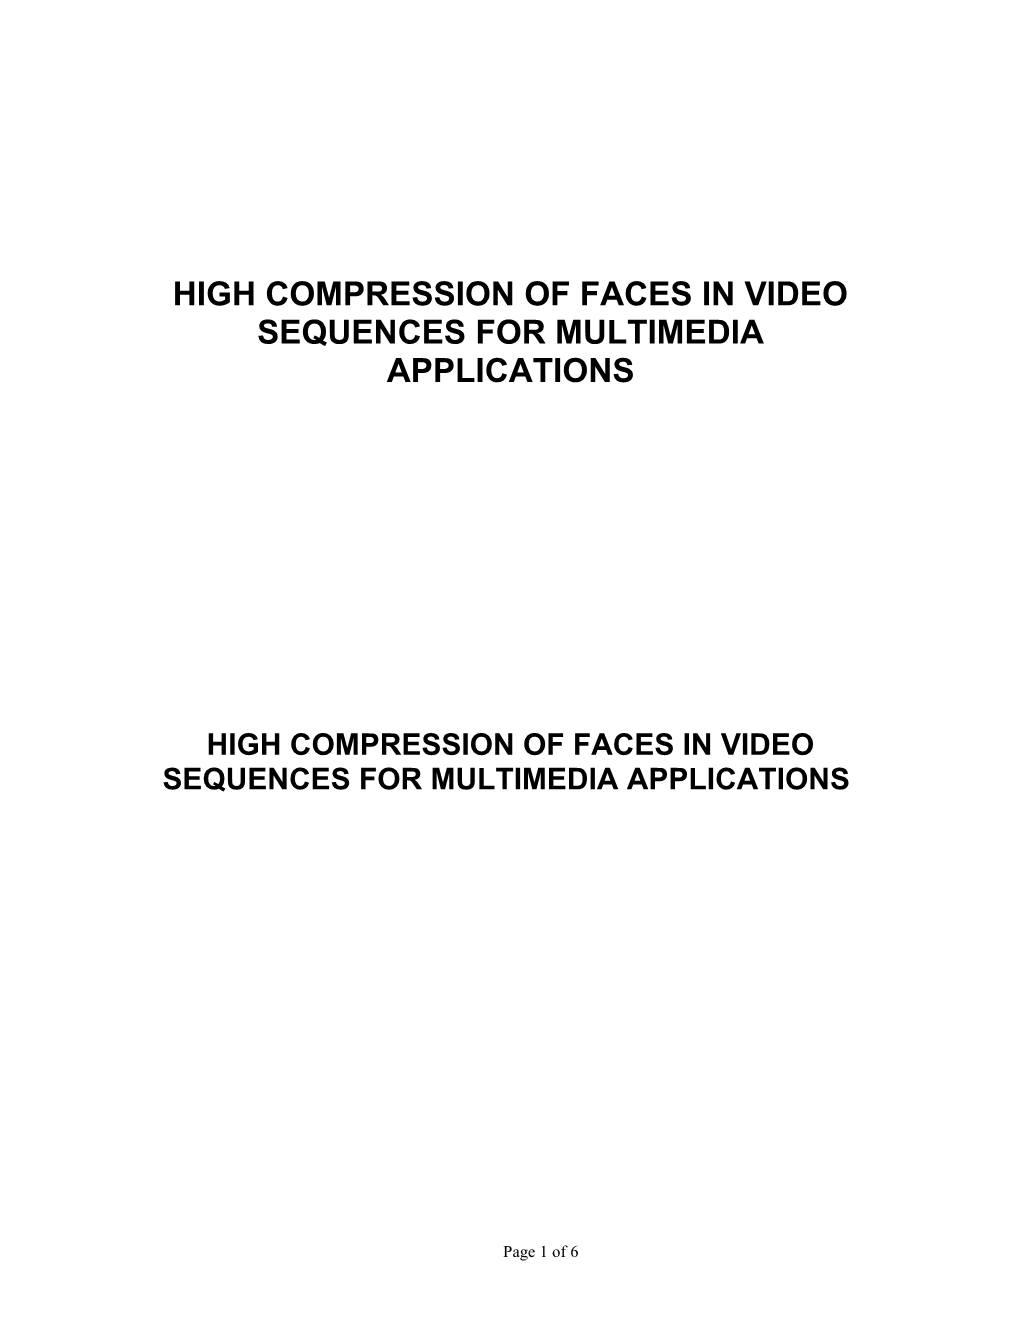 High Compression of Faces in Video Sequences for Multimedia Applications